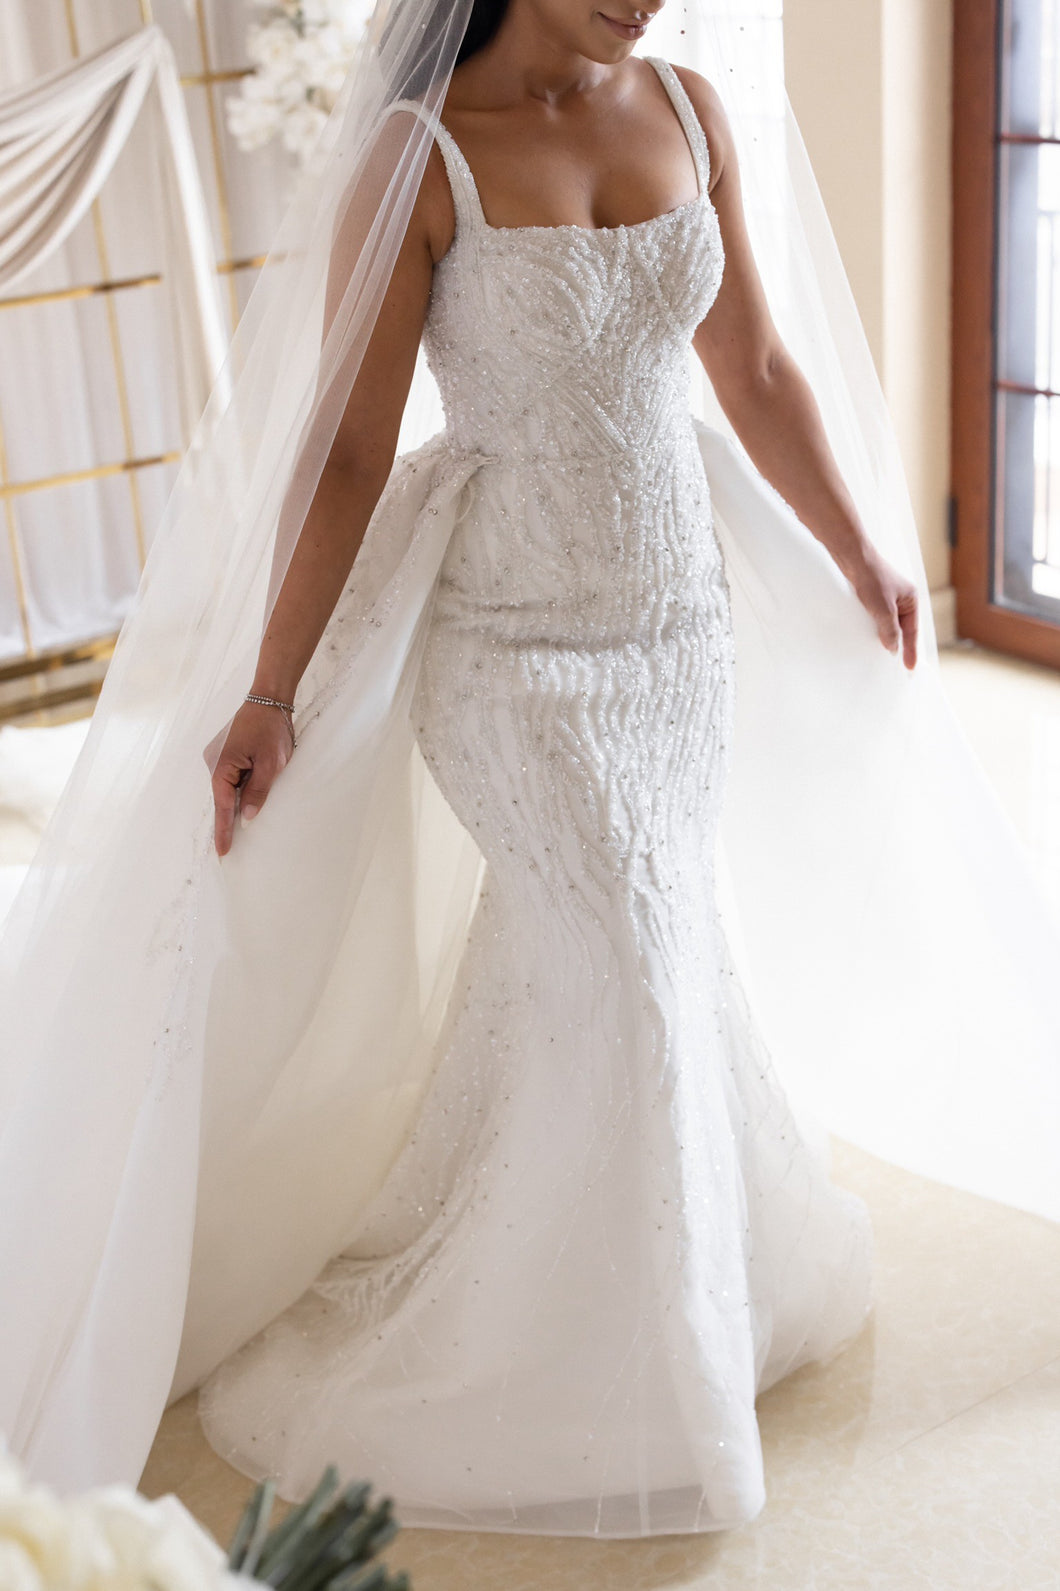 C2024-B81S - beaded wedding gown with open bust line and shoulder straps